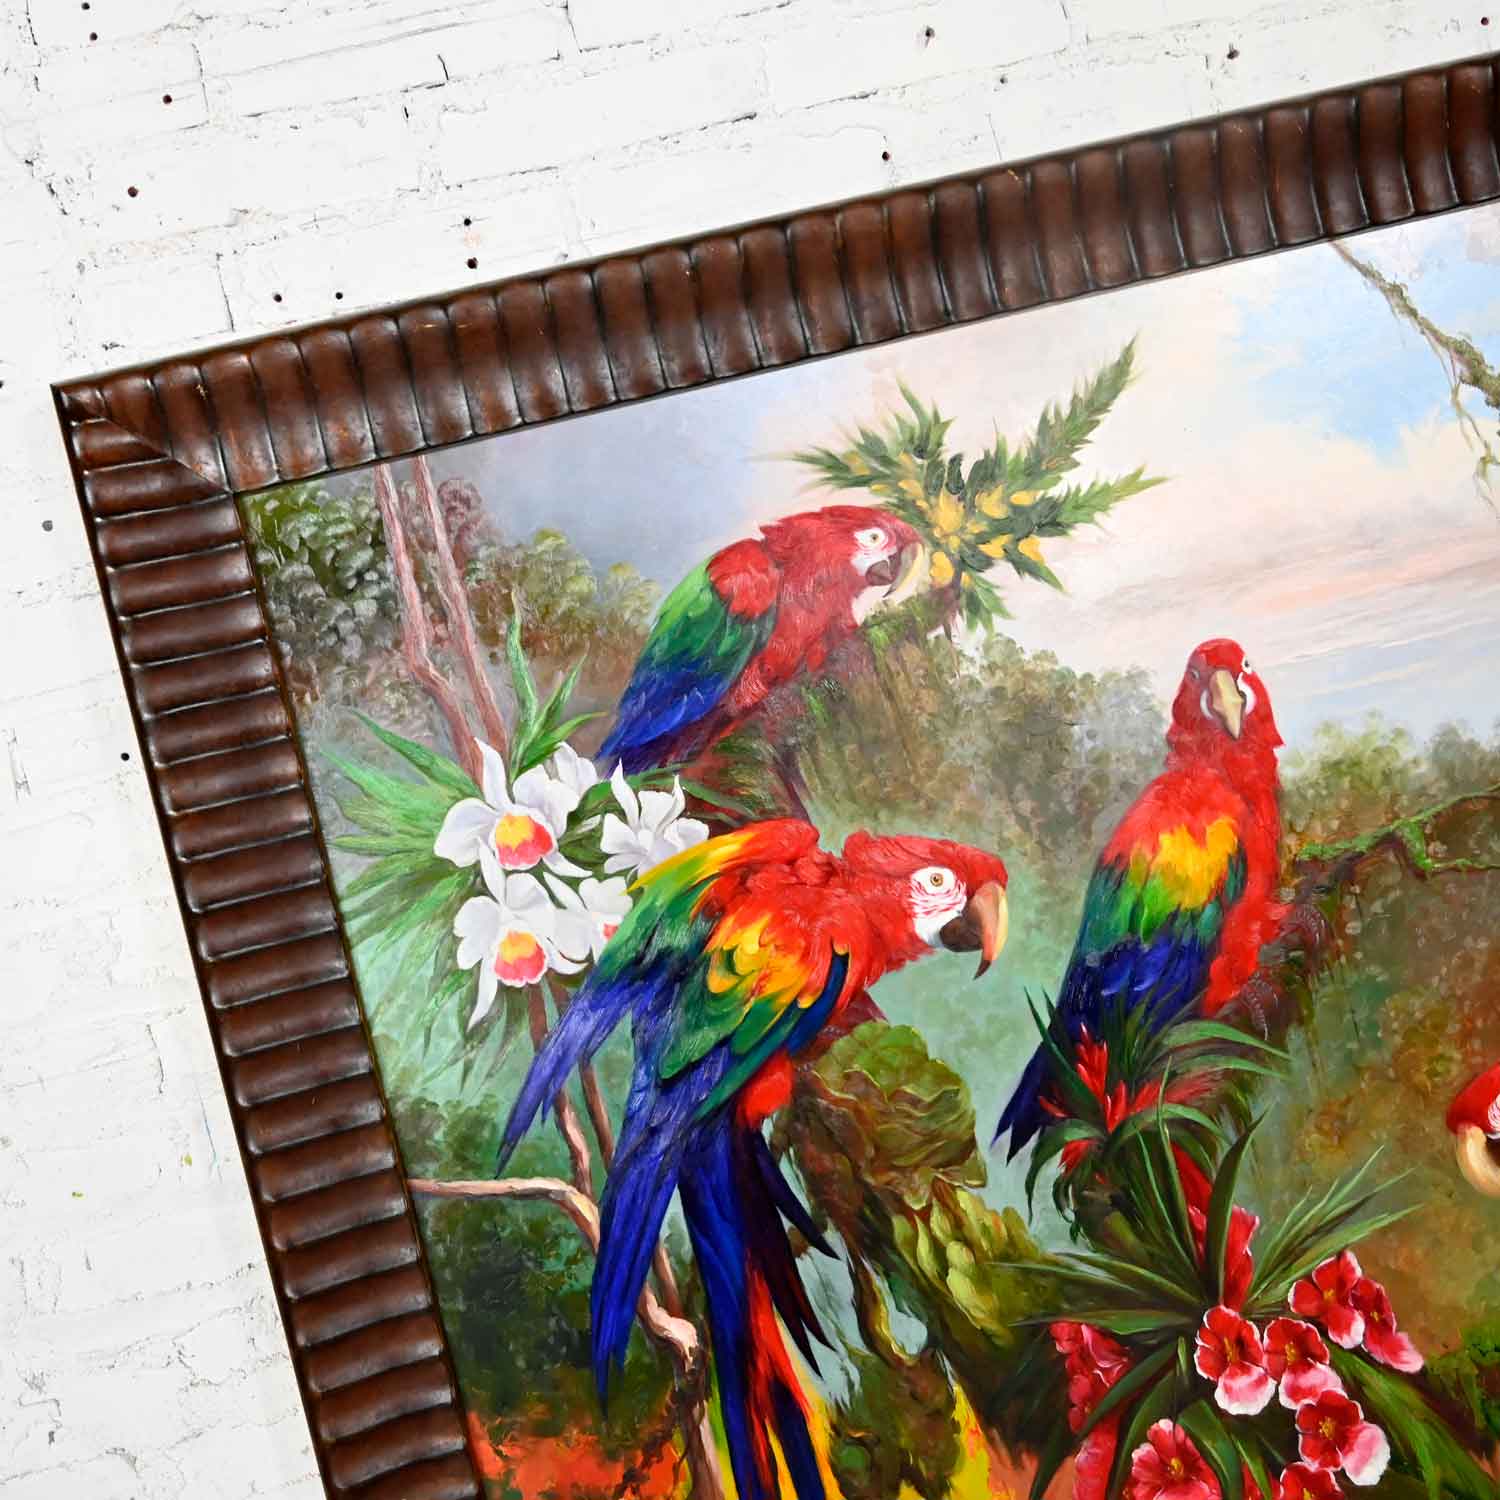 Vintage Original Large Scale Parrot Painting by P. Charles with Dark Grooved Wood Frame